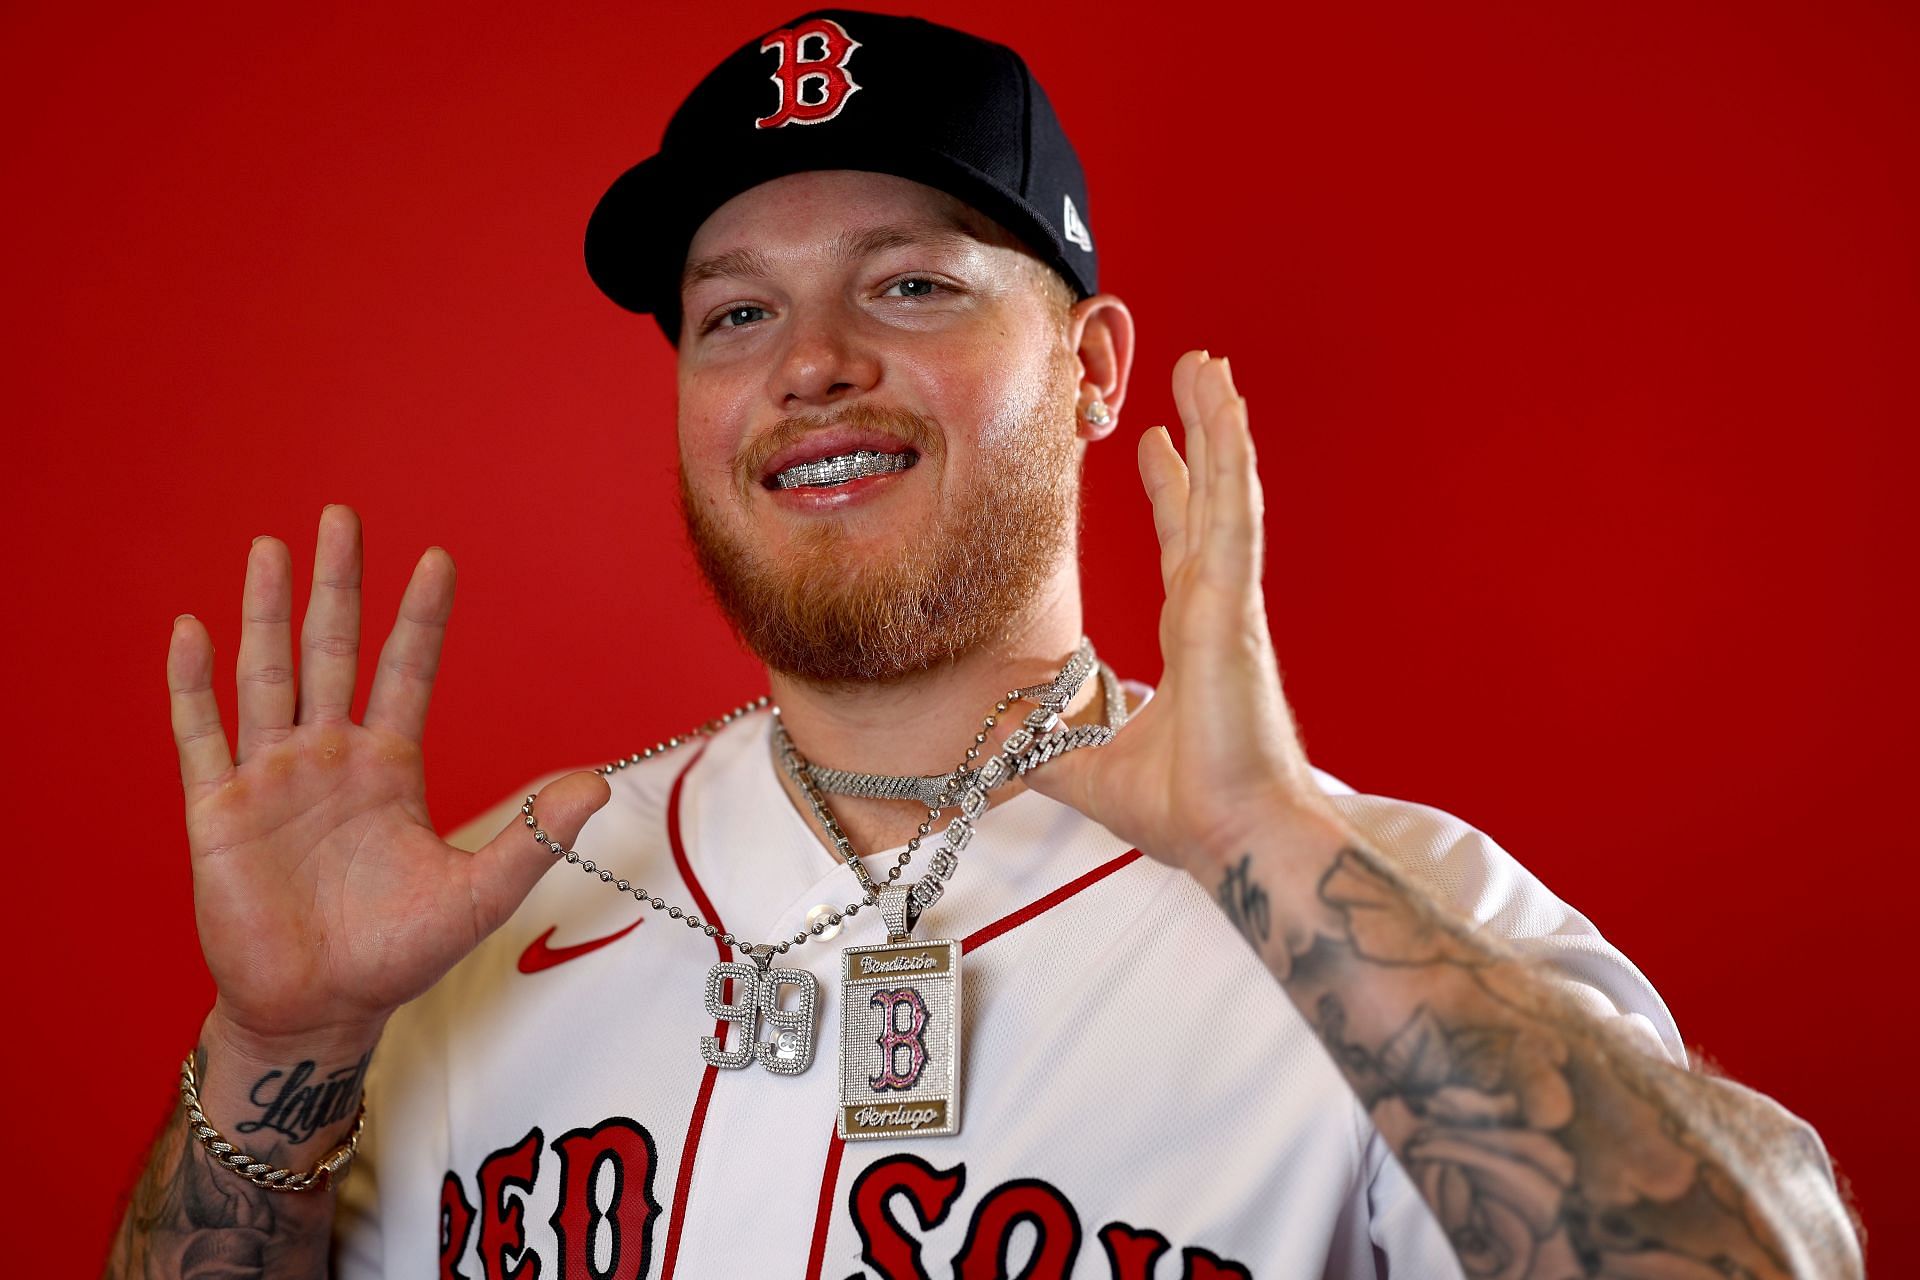 Alex Verdugo plays for the Boston Red Sox